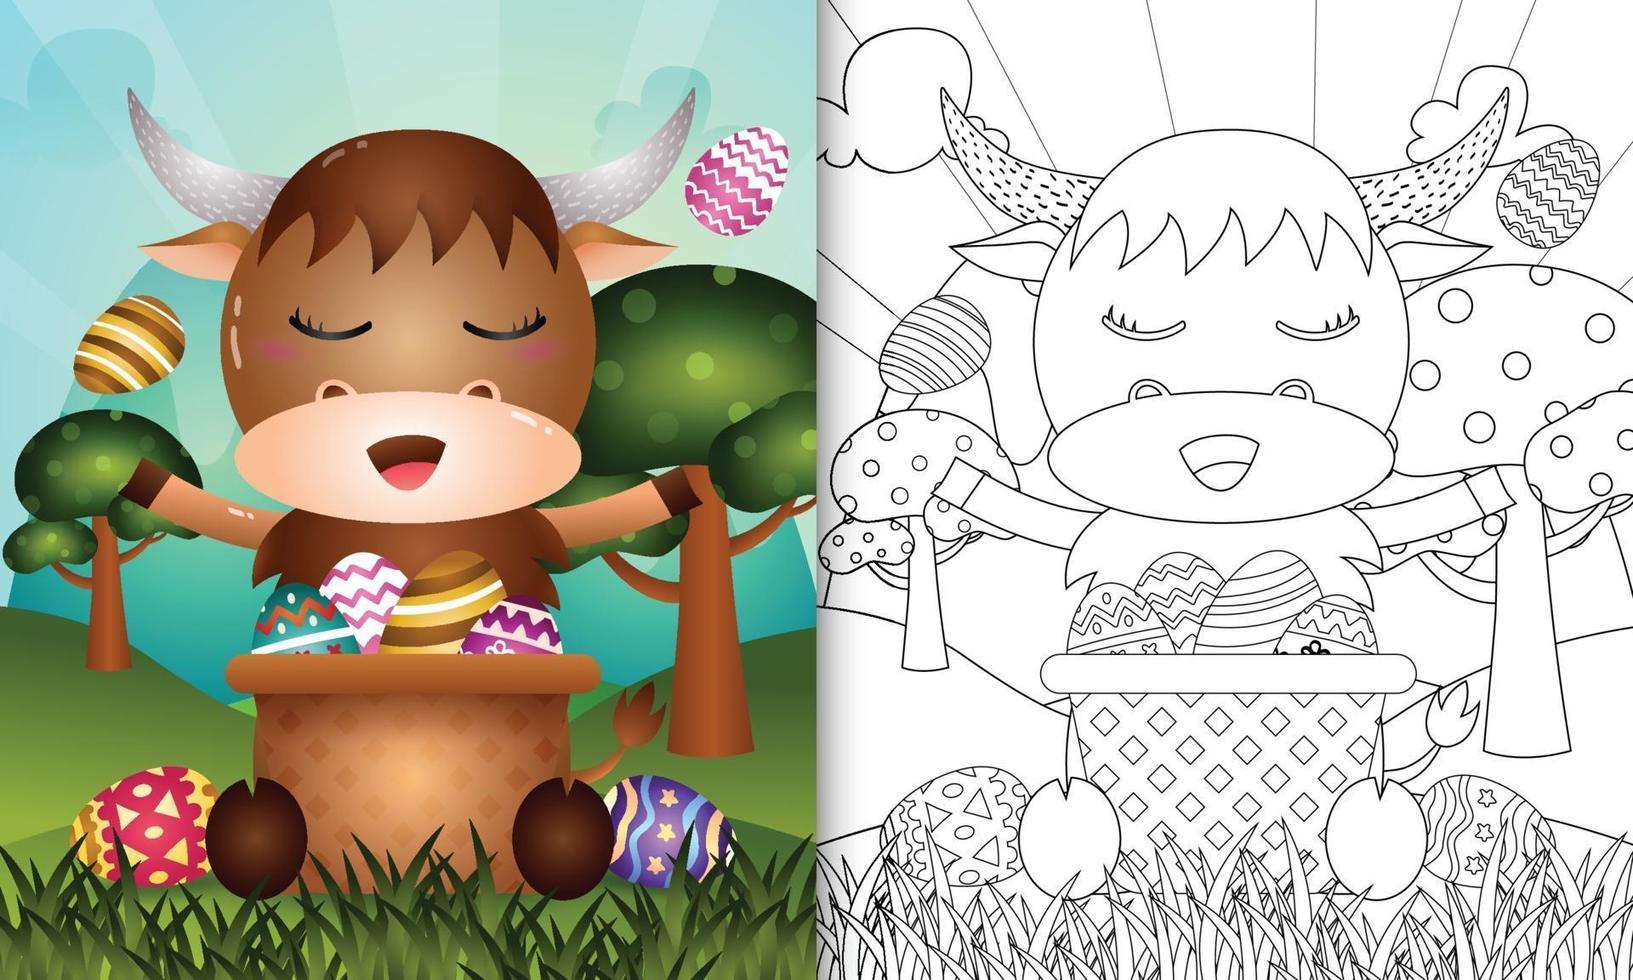 coloring book for kids themed happy easter day with character illustration of a cute buffalo in the bucket egg vector